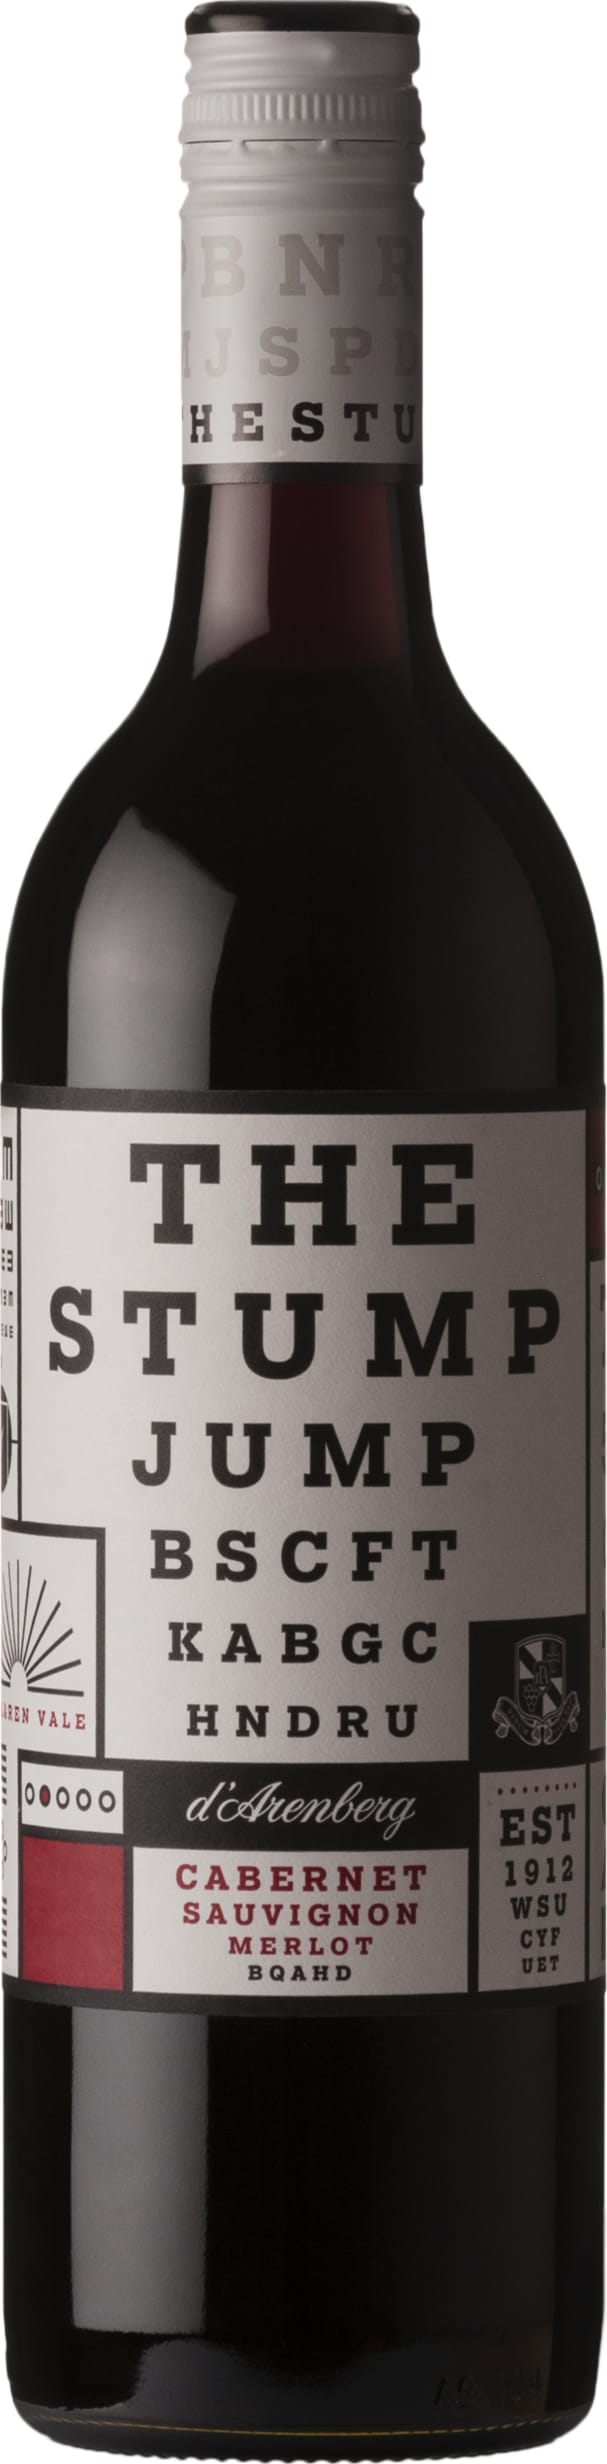 D Arenberg The Stump Jump Cabernet Sauvignon 2020 75cl - Buy D Arenberg Wines from GREAT WINES DIRECT wine shop